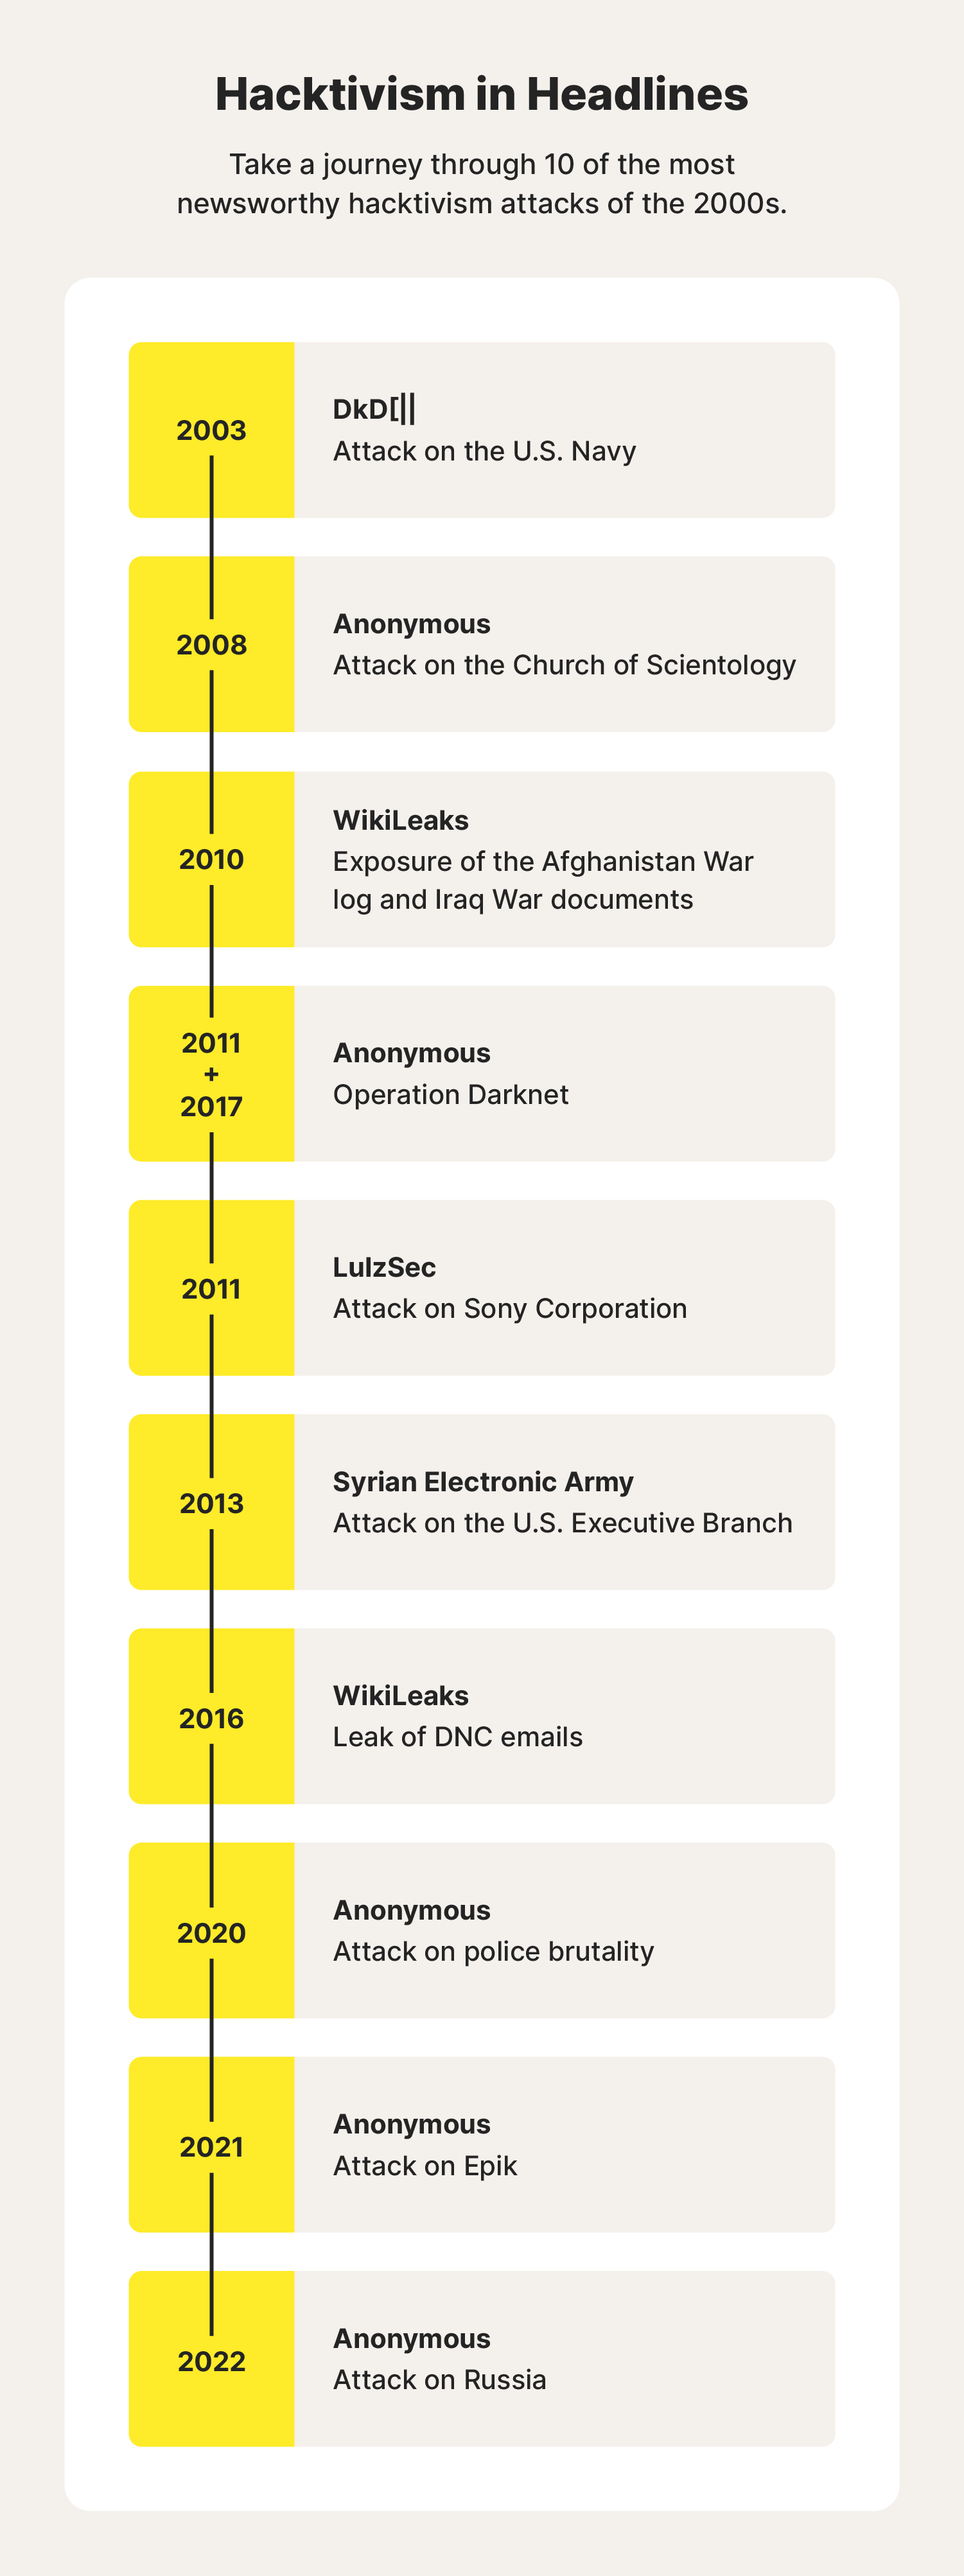 A timeline showcases hacktivism attacks that have made headlines over the years.